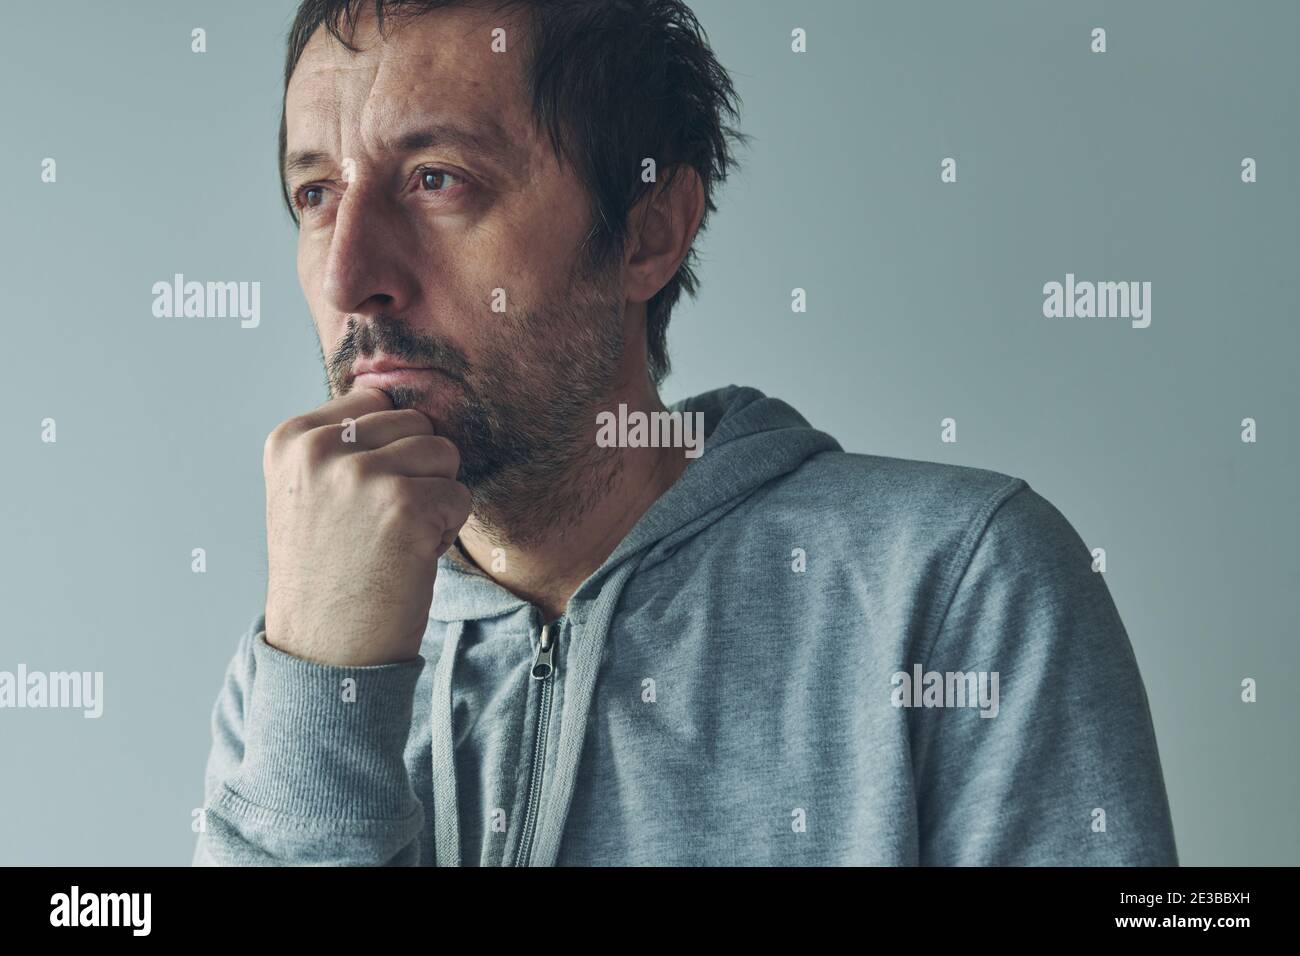 Introspection concept, man thinking an analyzing himself, portrait of thoughtful casual caucasian male person Stock Photo